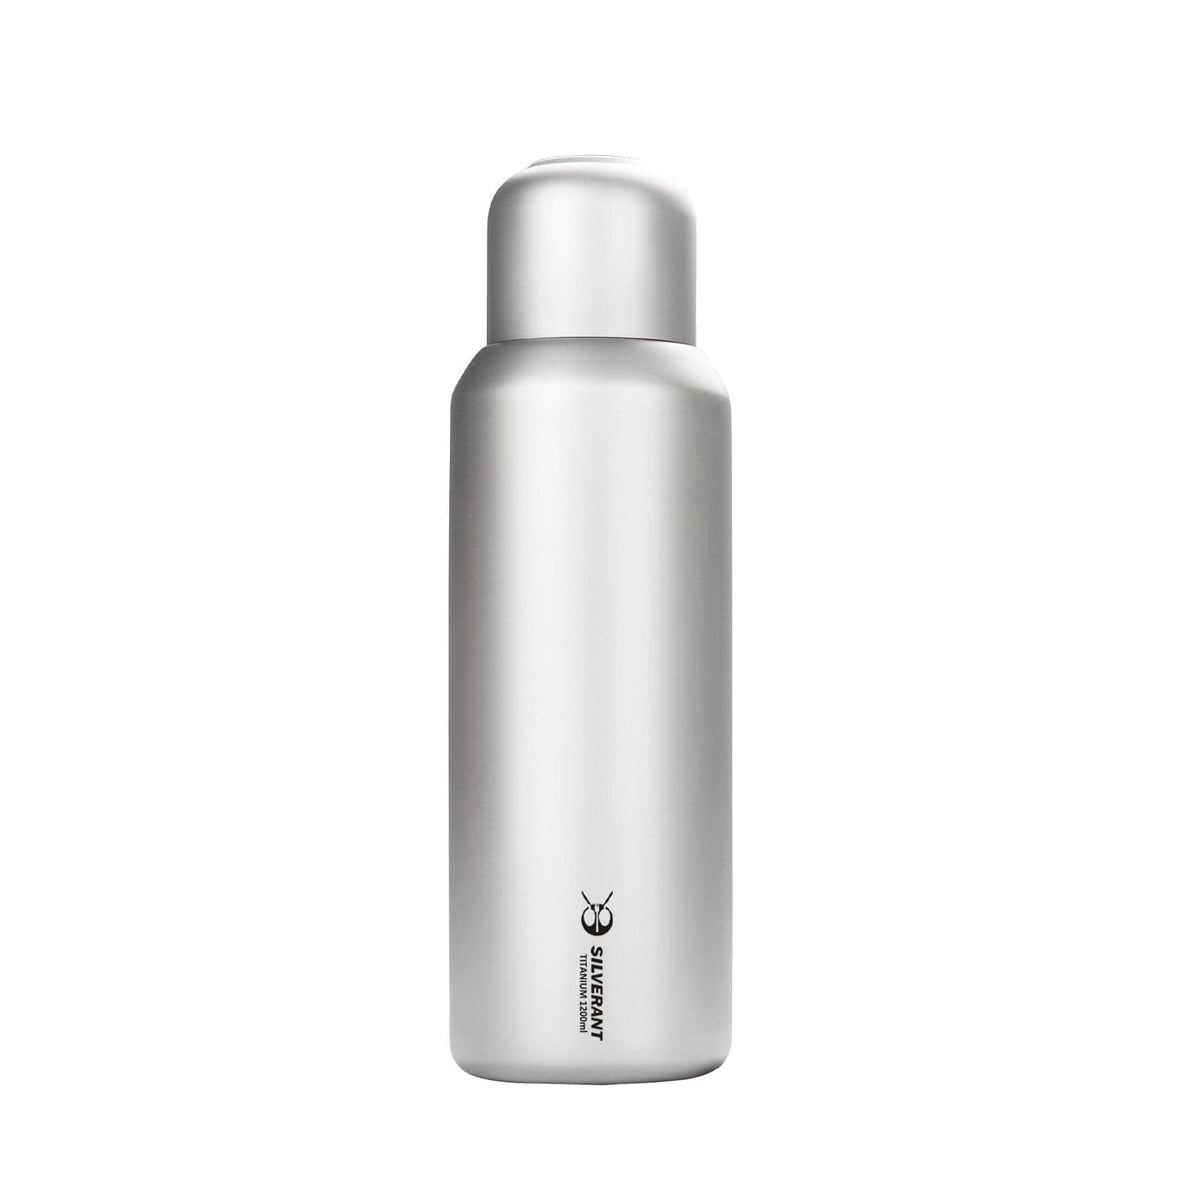 SilverAnt Double-Wall Water Bottle 400ml/14fl oz - Ultralight Titanium Insulated Thermos Flask for EDC Camping Hiking Backpacking Crystallized Finish